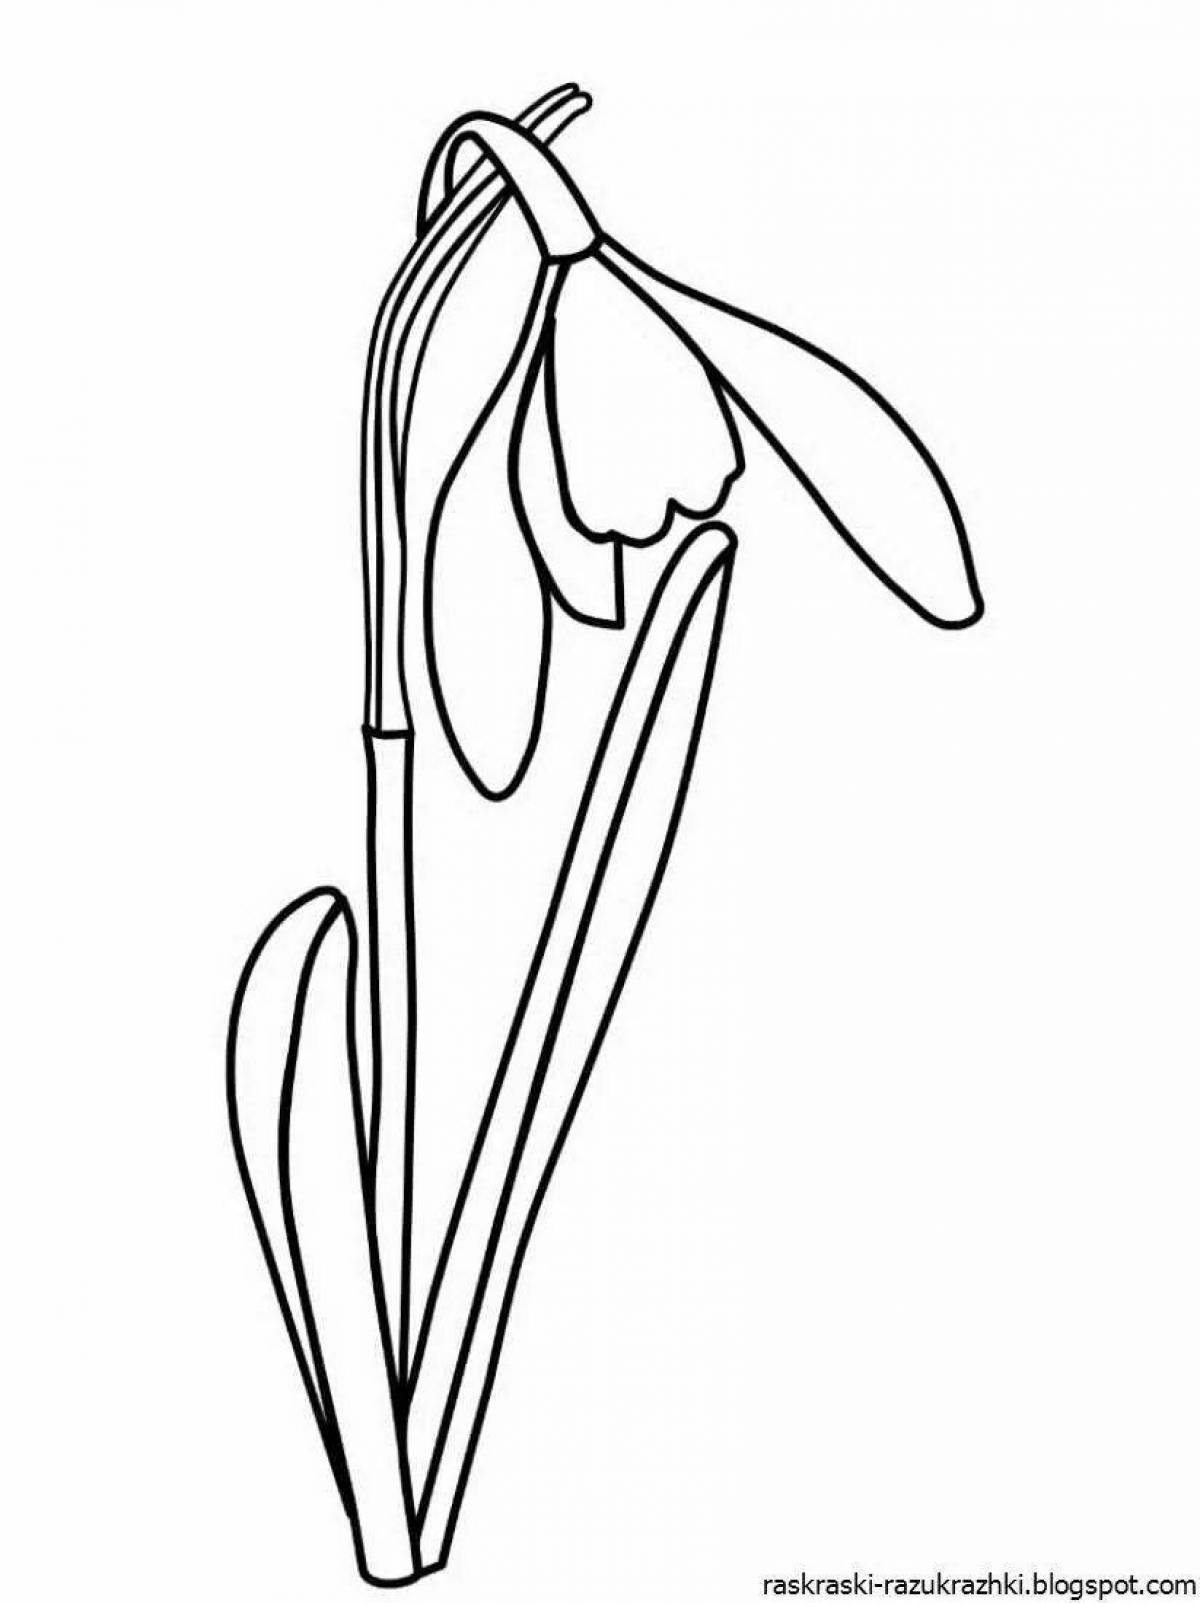 Big snowdrops coloring pages for kids